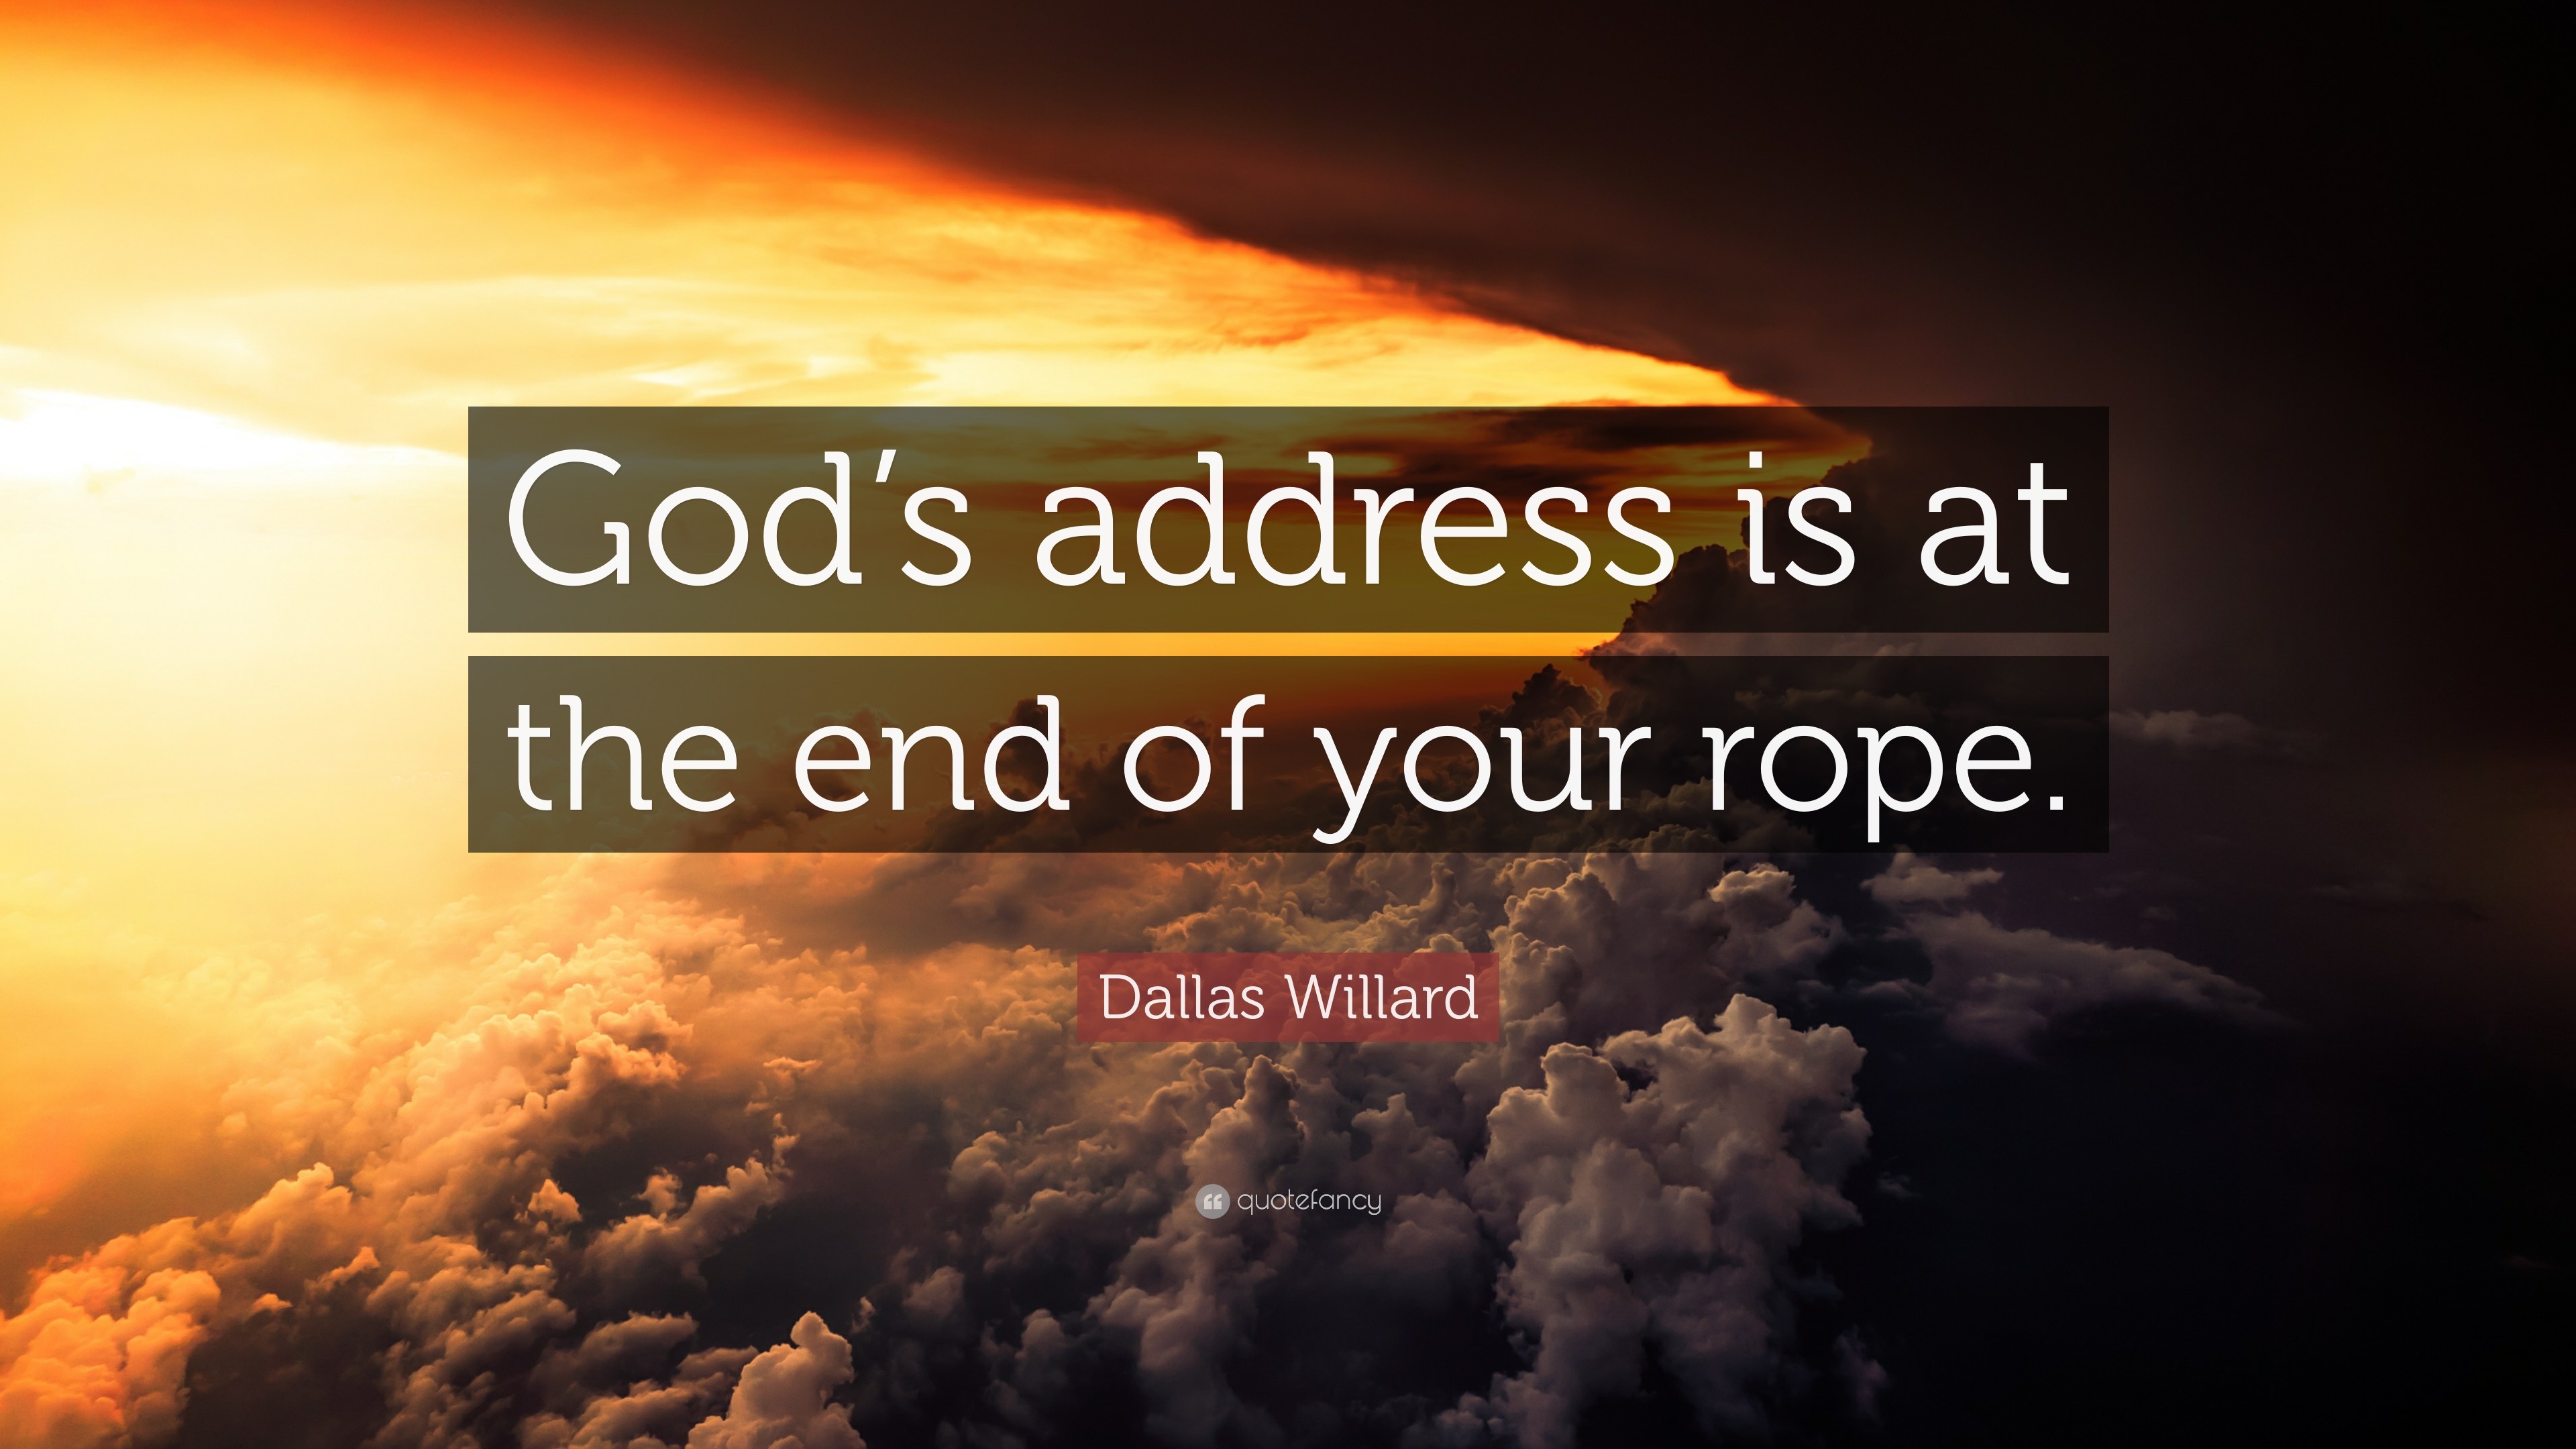 Dallas Willard Quote: “God’s address is at the end of your rope.” (12